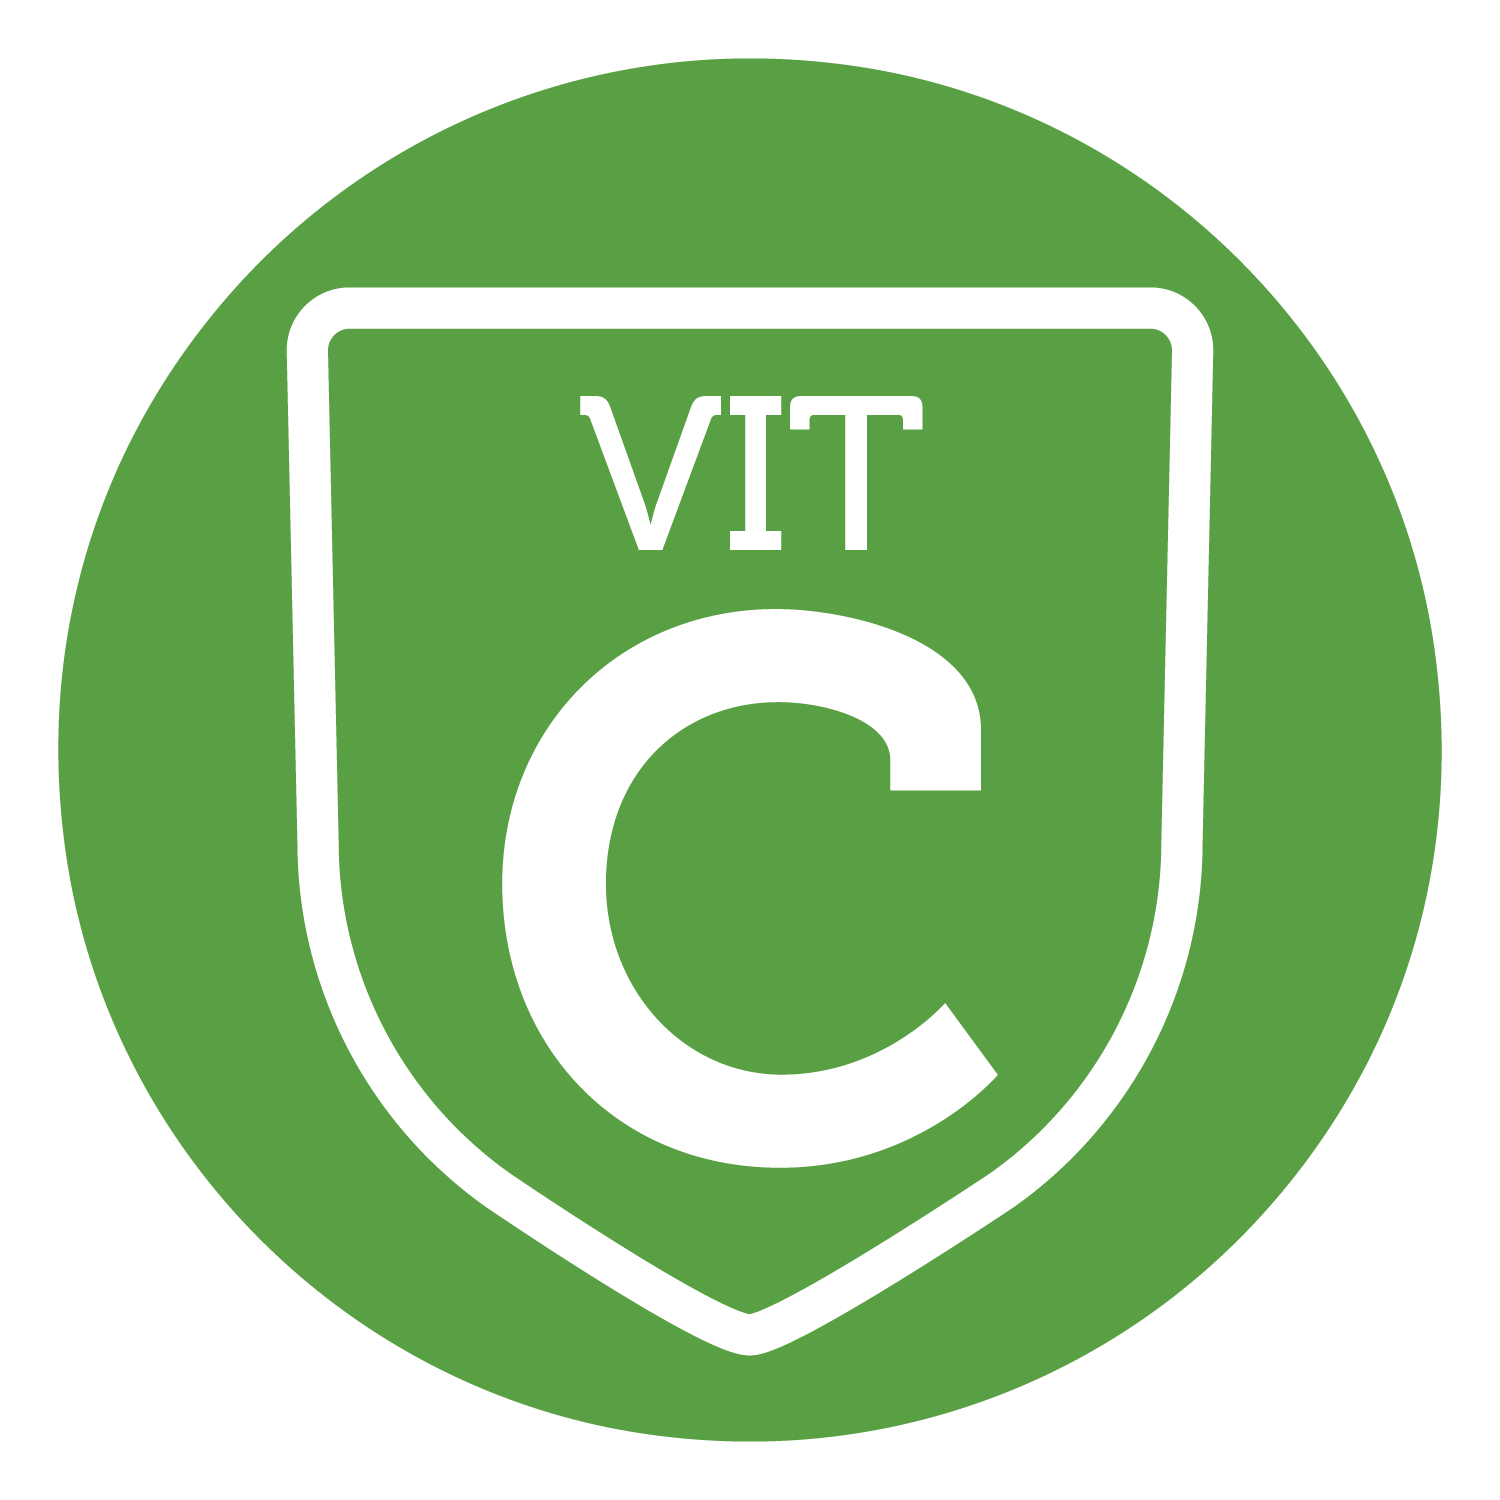 A circular, green icon with Vit C written in the centre of a shield outlined in white